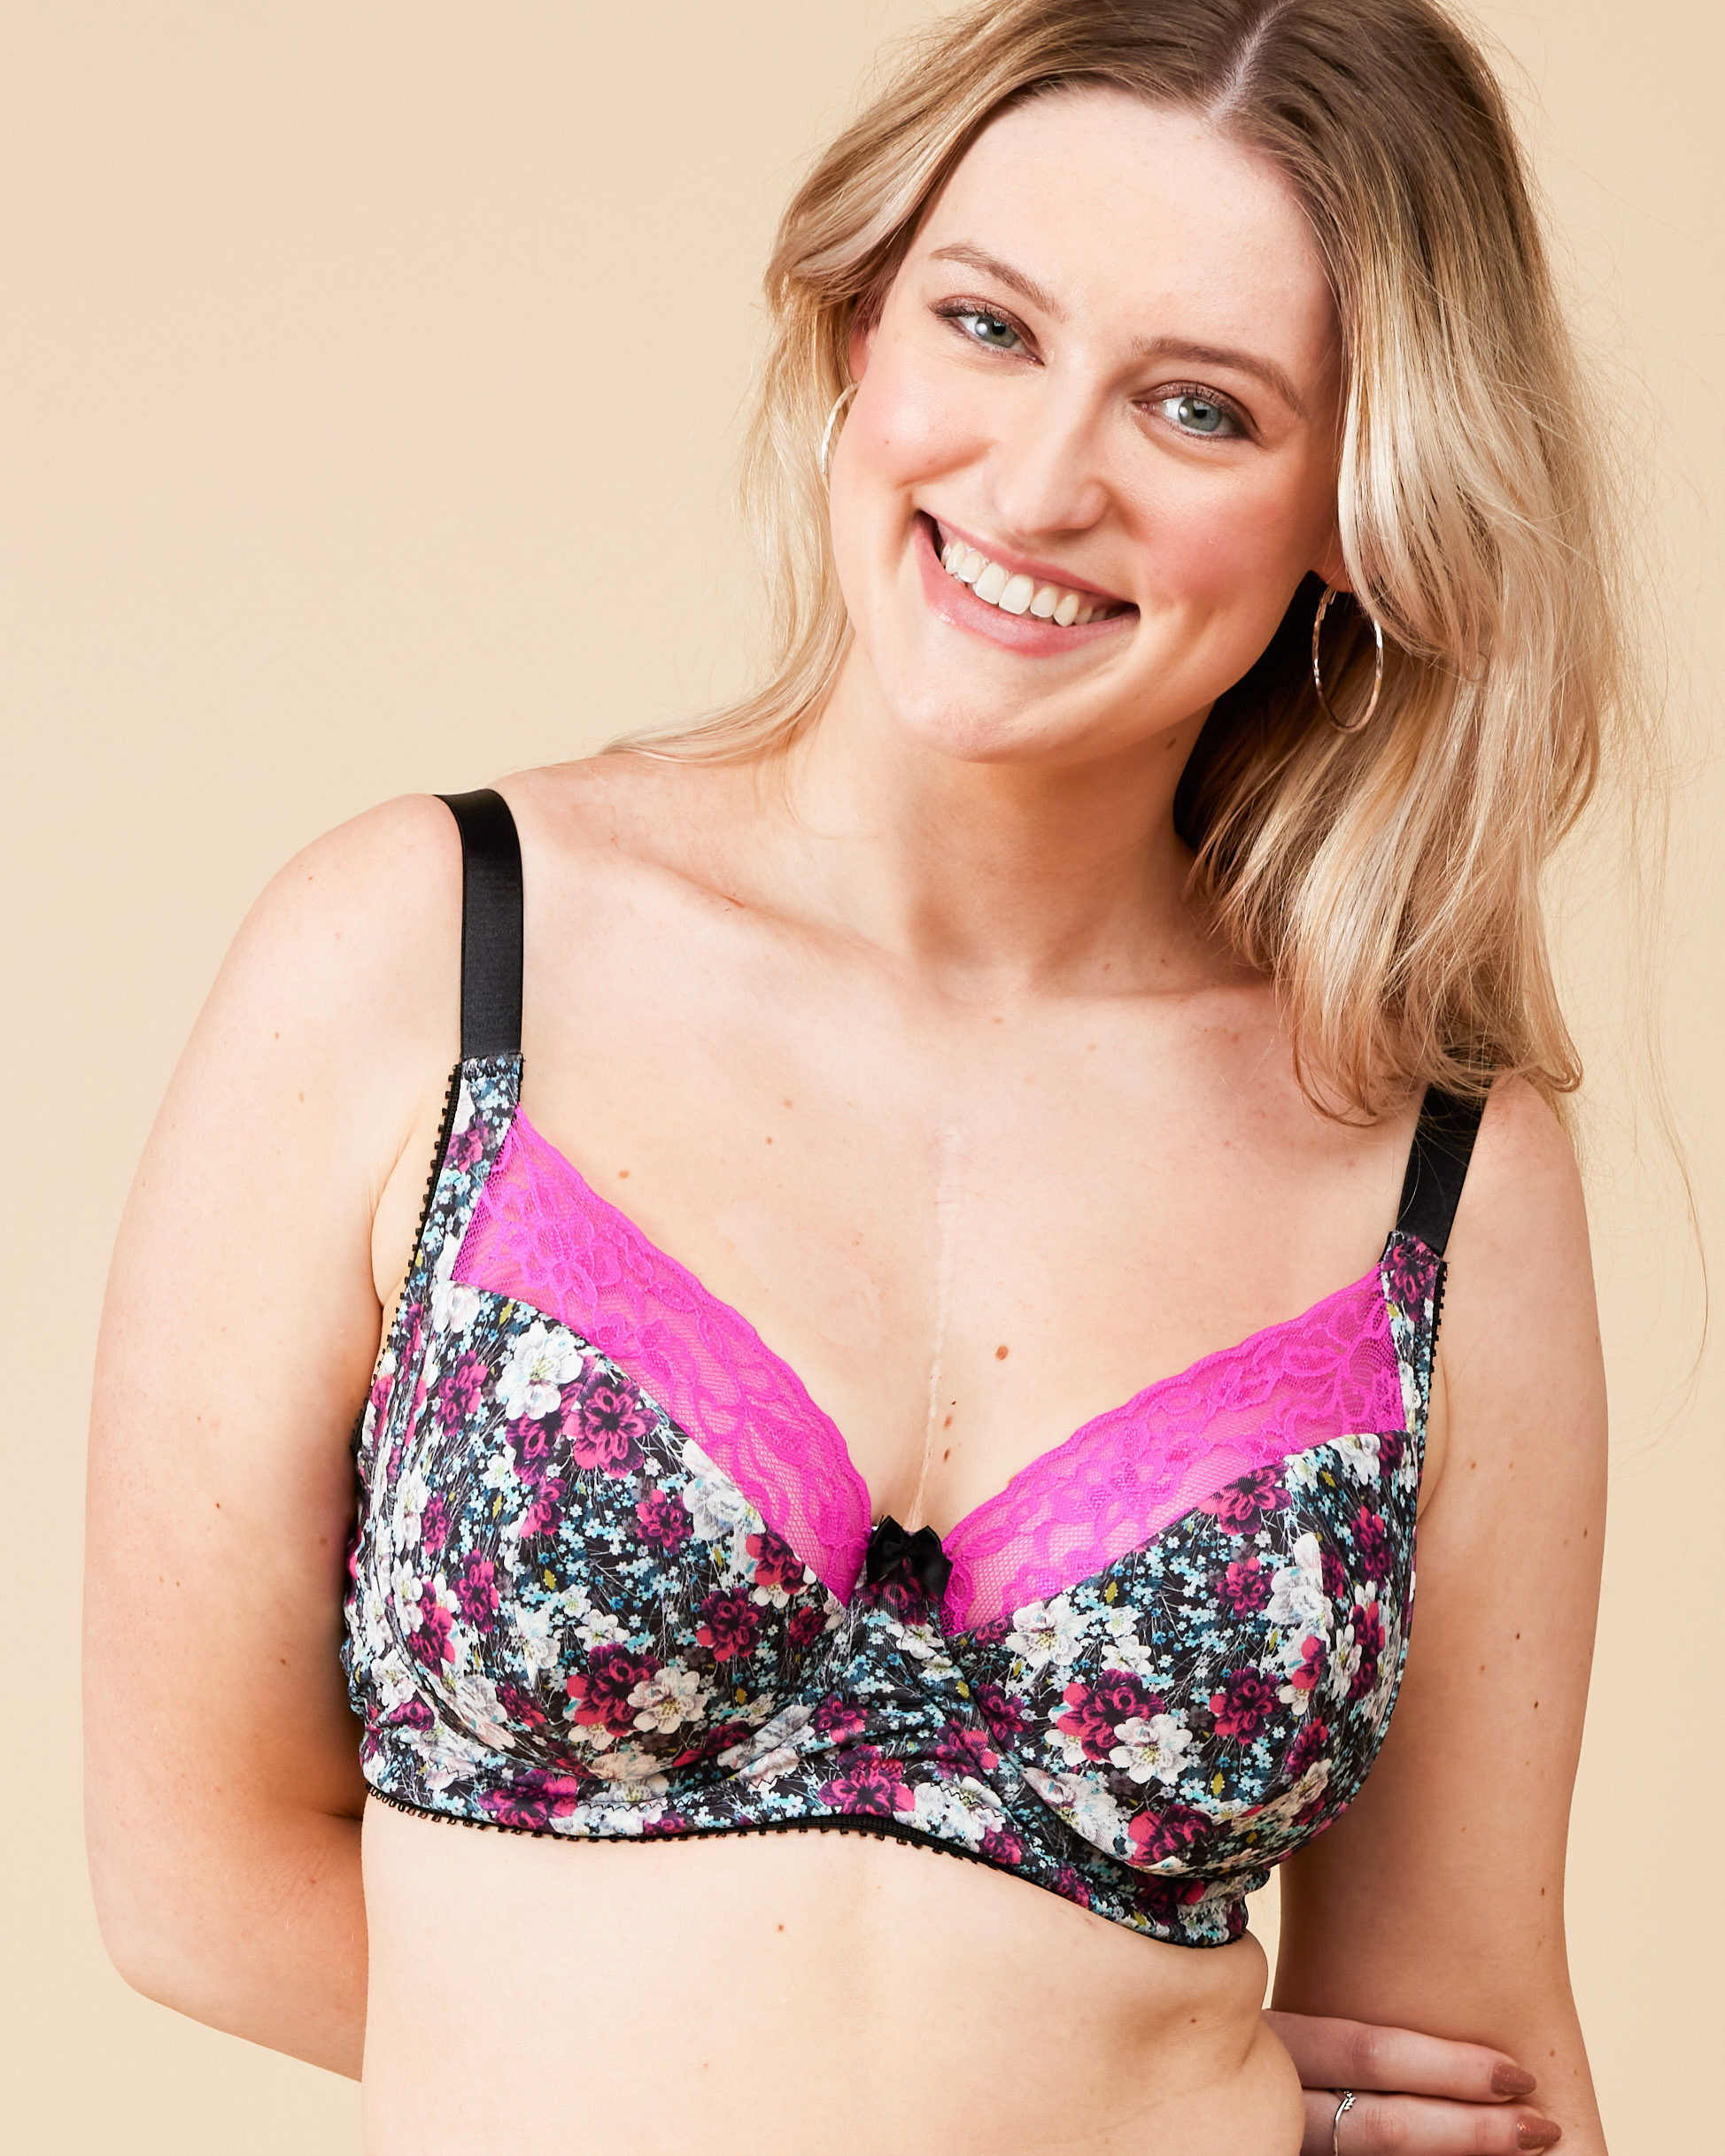 How to Get Your Correct Bra Size & Other Sizing Questions